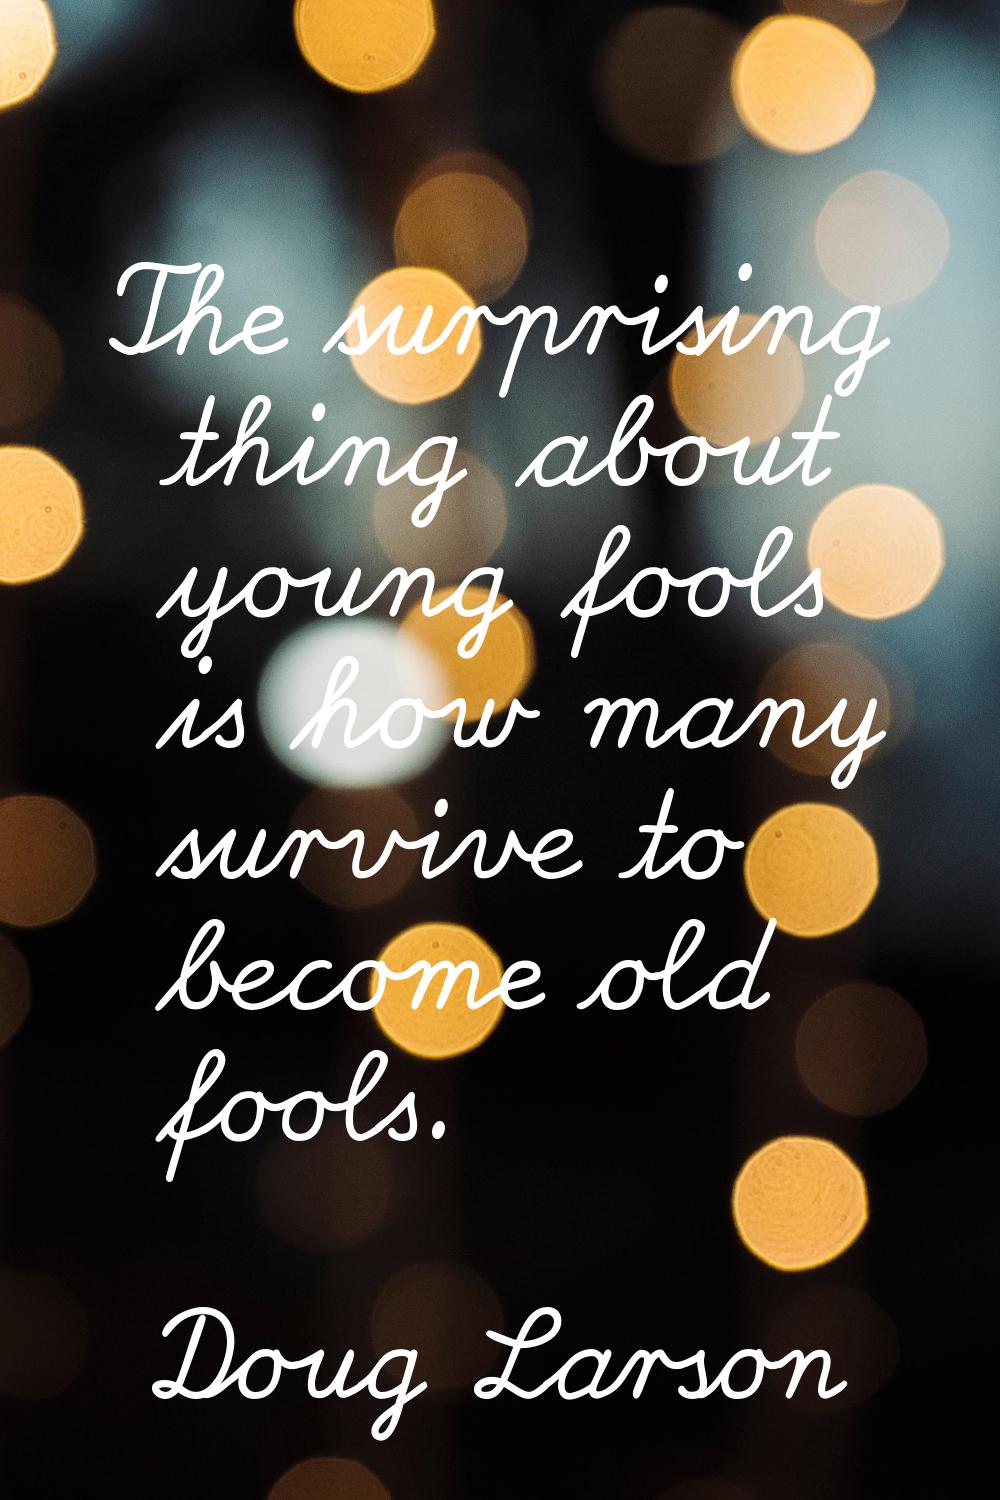 The surprising thing about young fools is how many survive to become old fools.